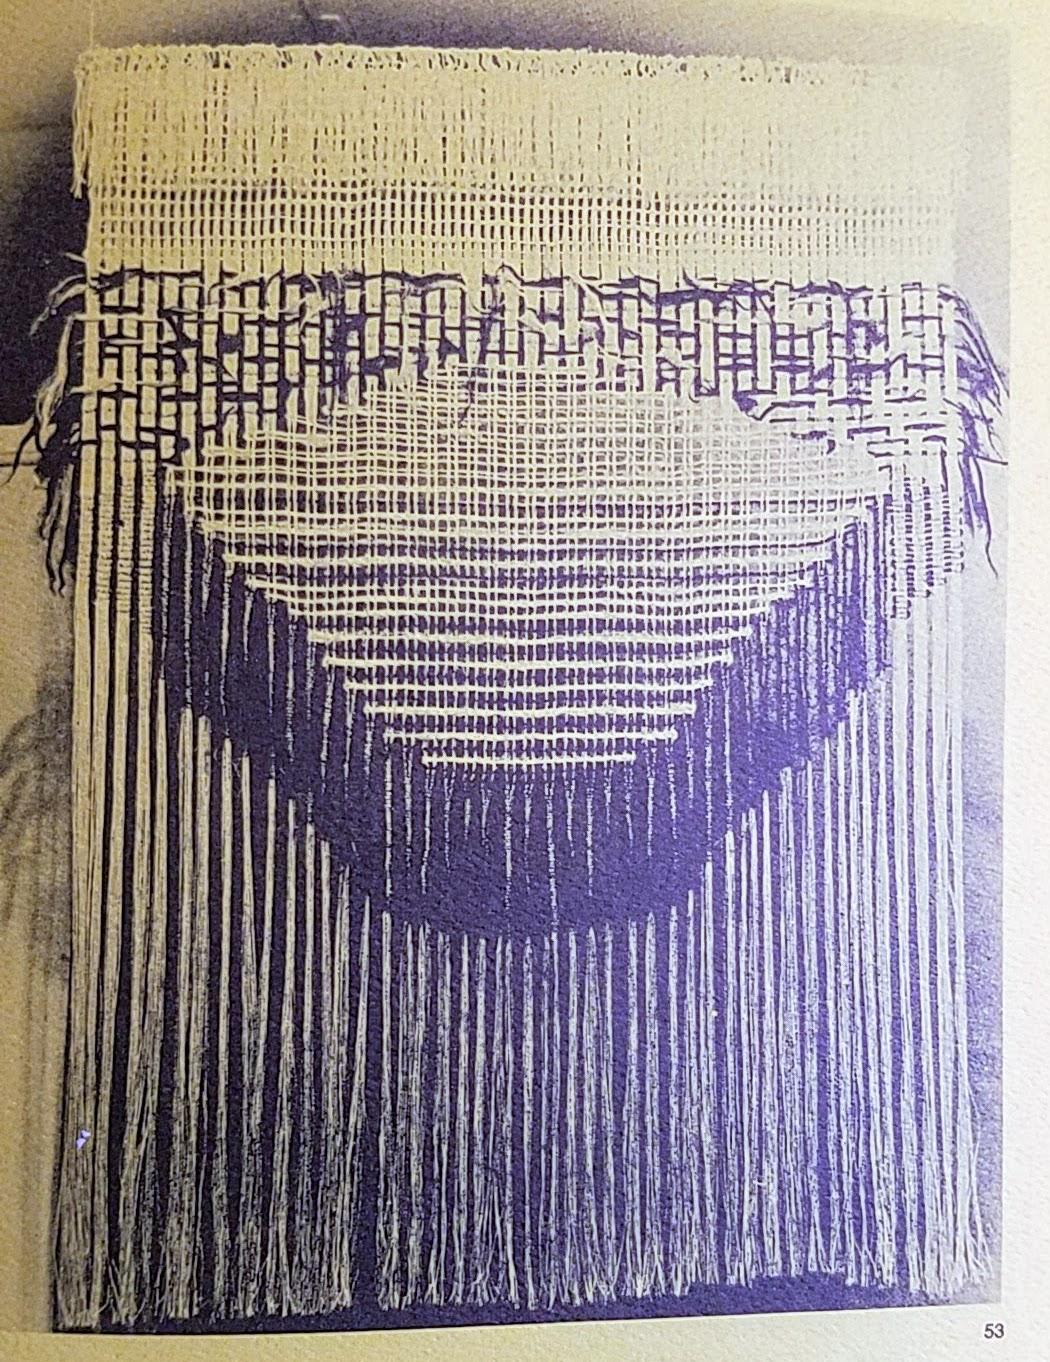 Jon B. Wahling Fiber Wall Art Suspended from a Welded Steel Armature, 1970s For Sale 2